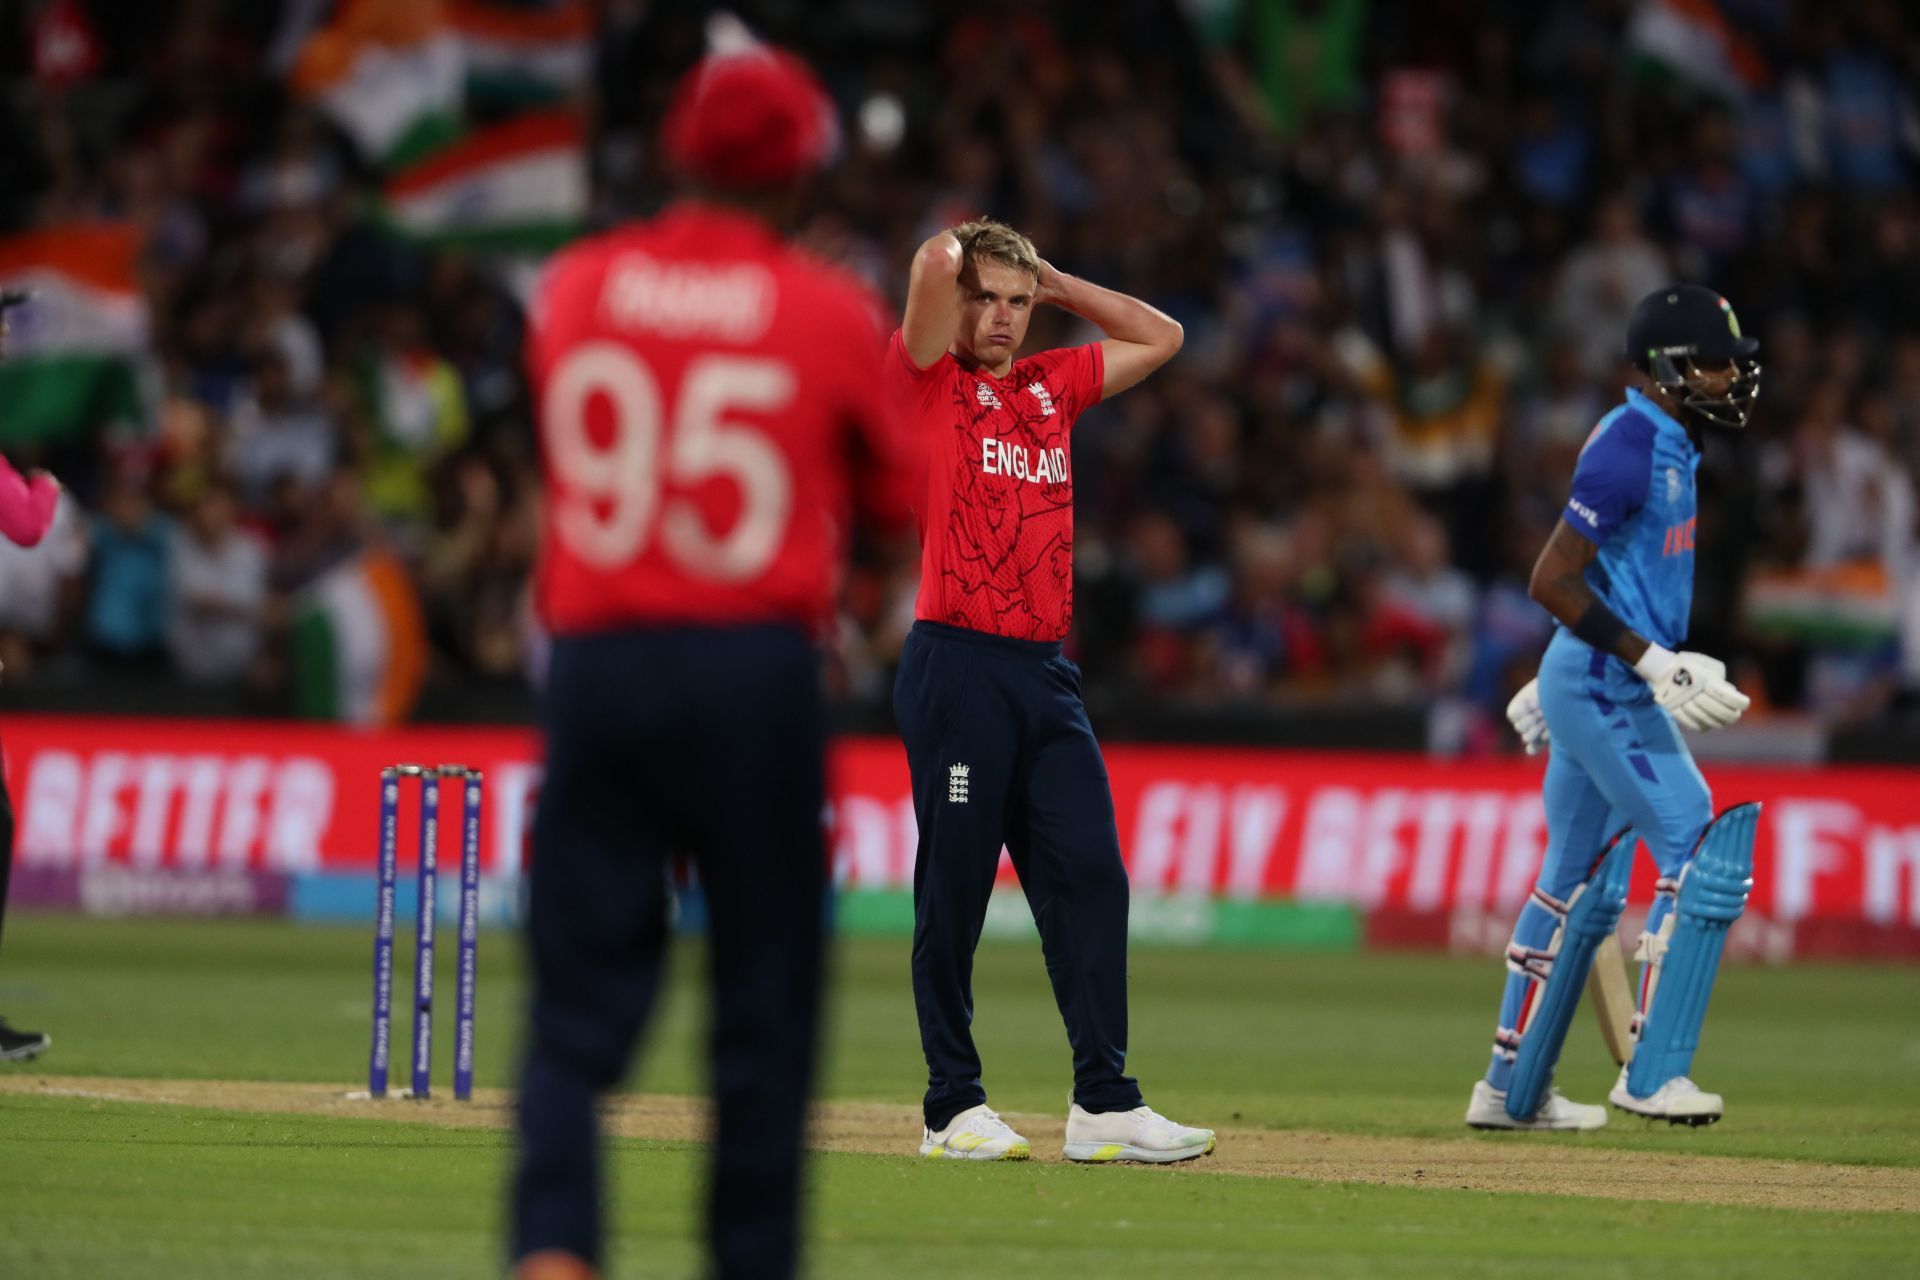 Sam Curran conceded 42 runs in his four-over spell against India.